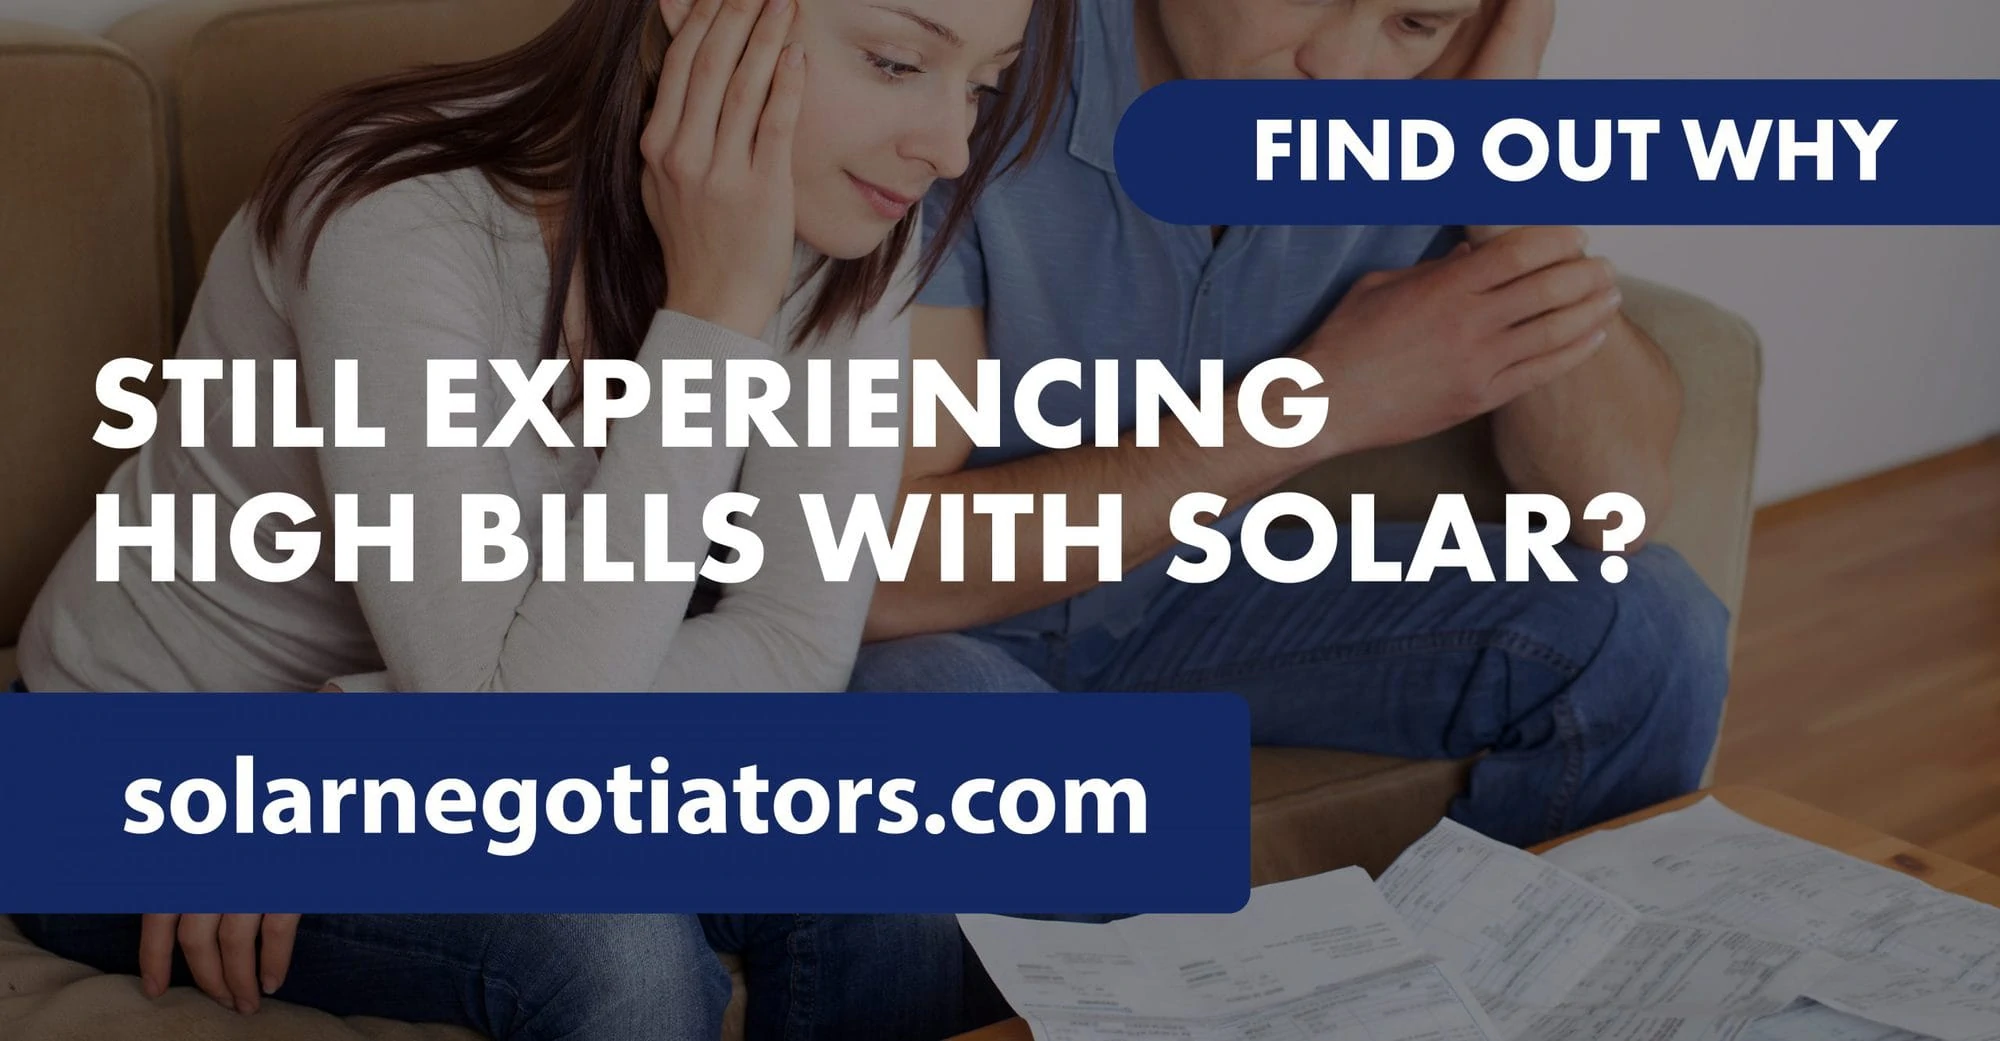 Still Experiencing High Bills with Solar? Find Out Why.